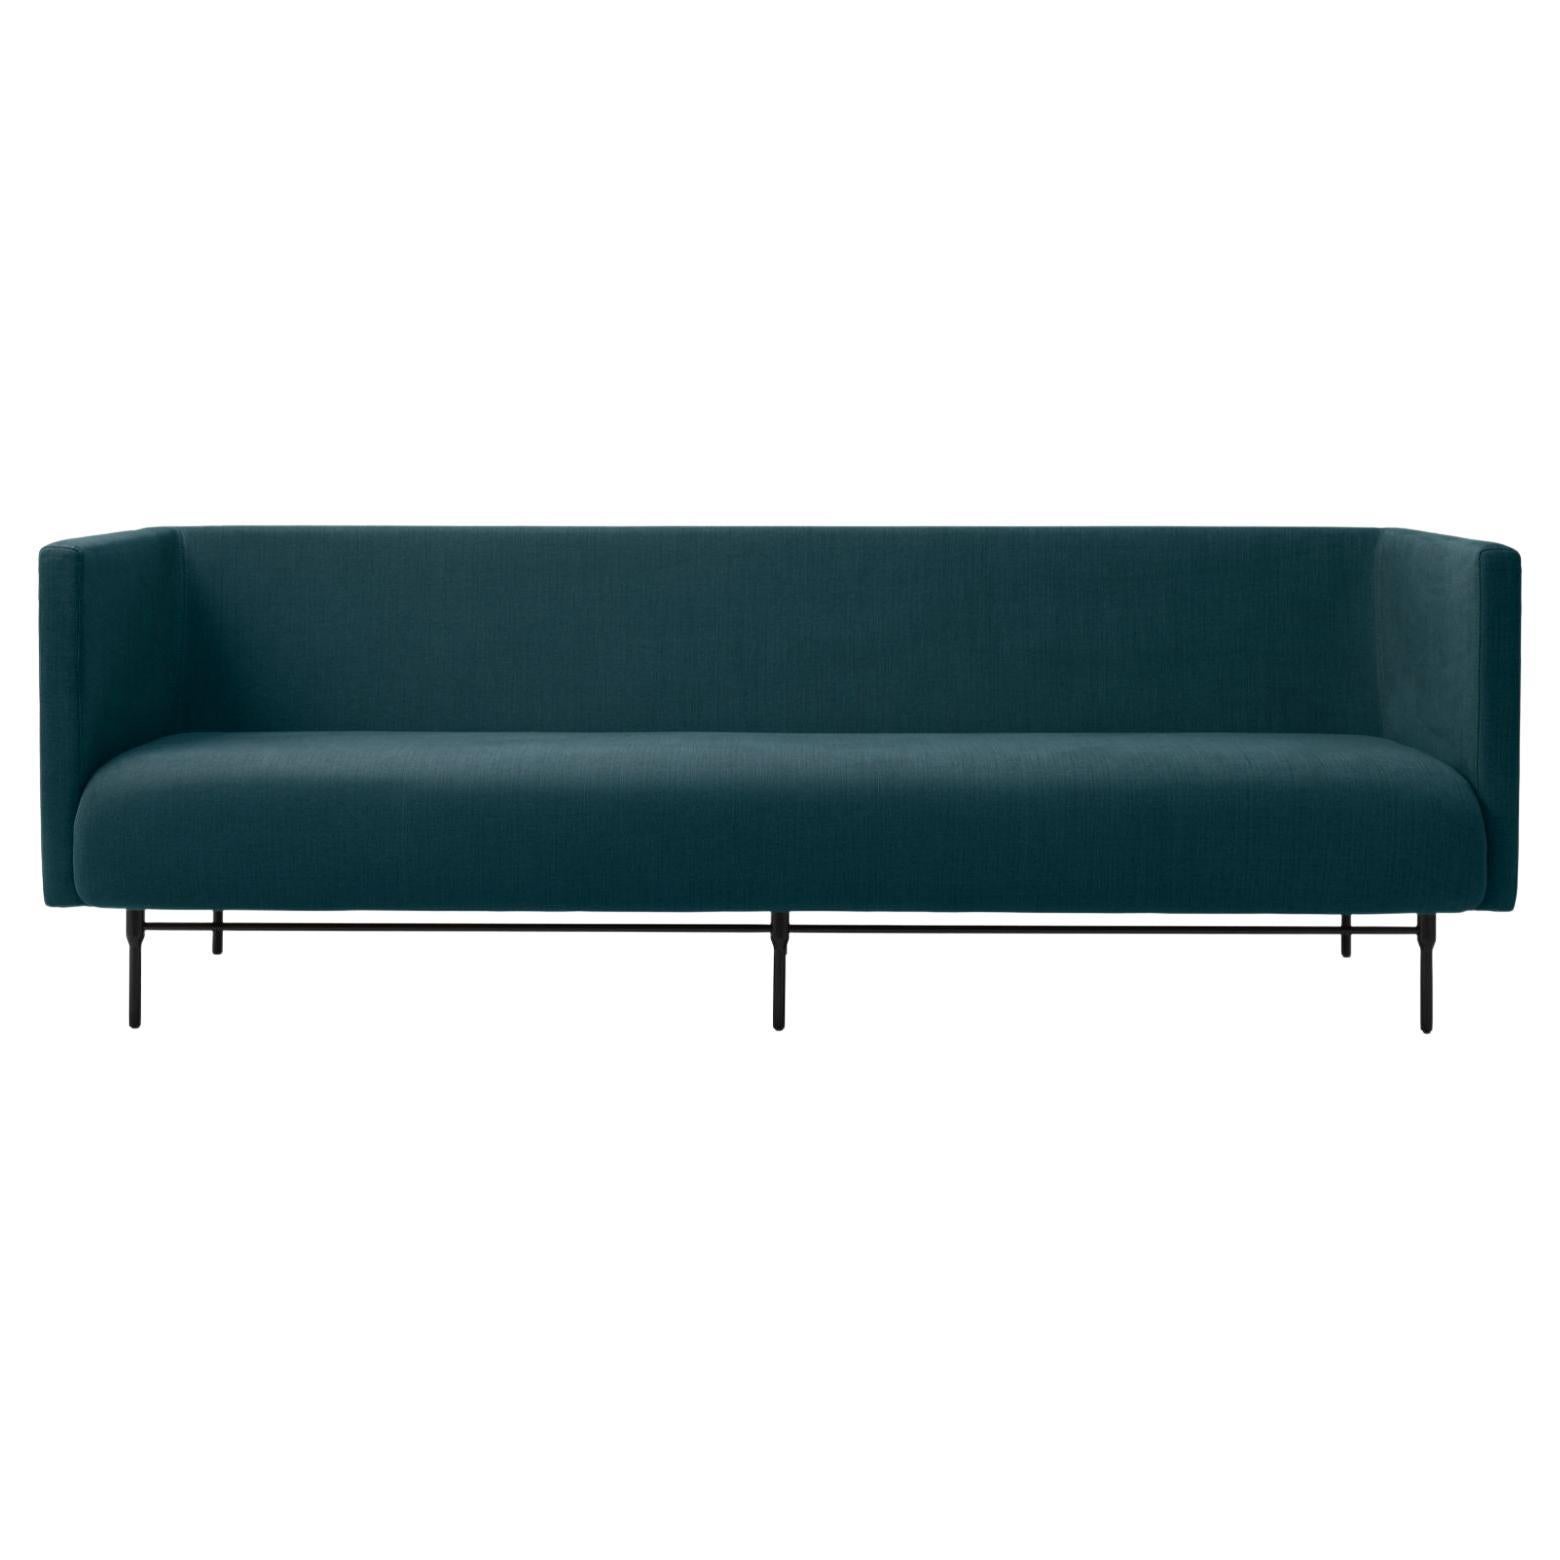 Galore 3 Seater Dark Teal by Warm Nordic